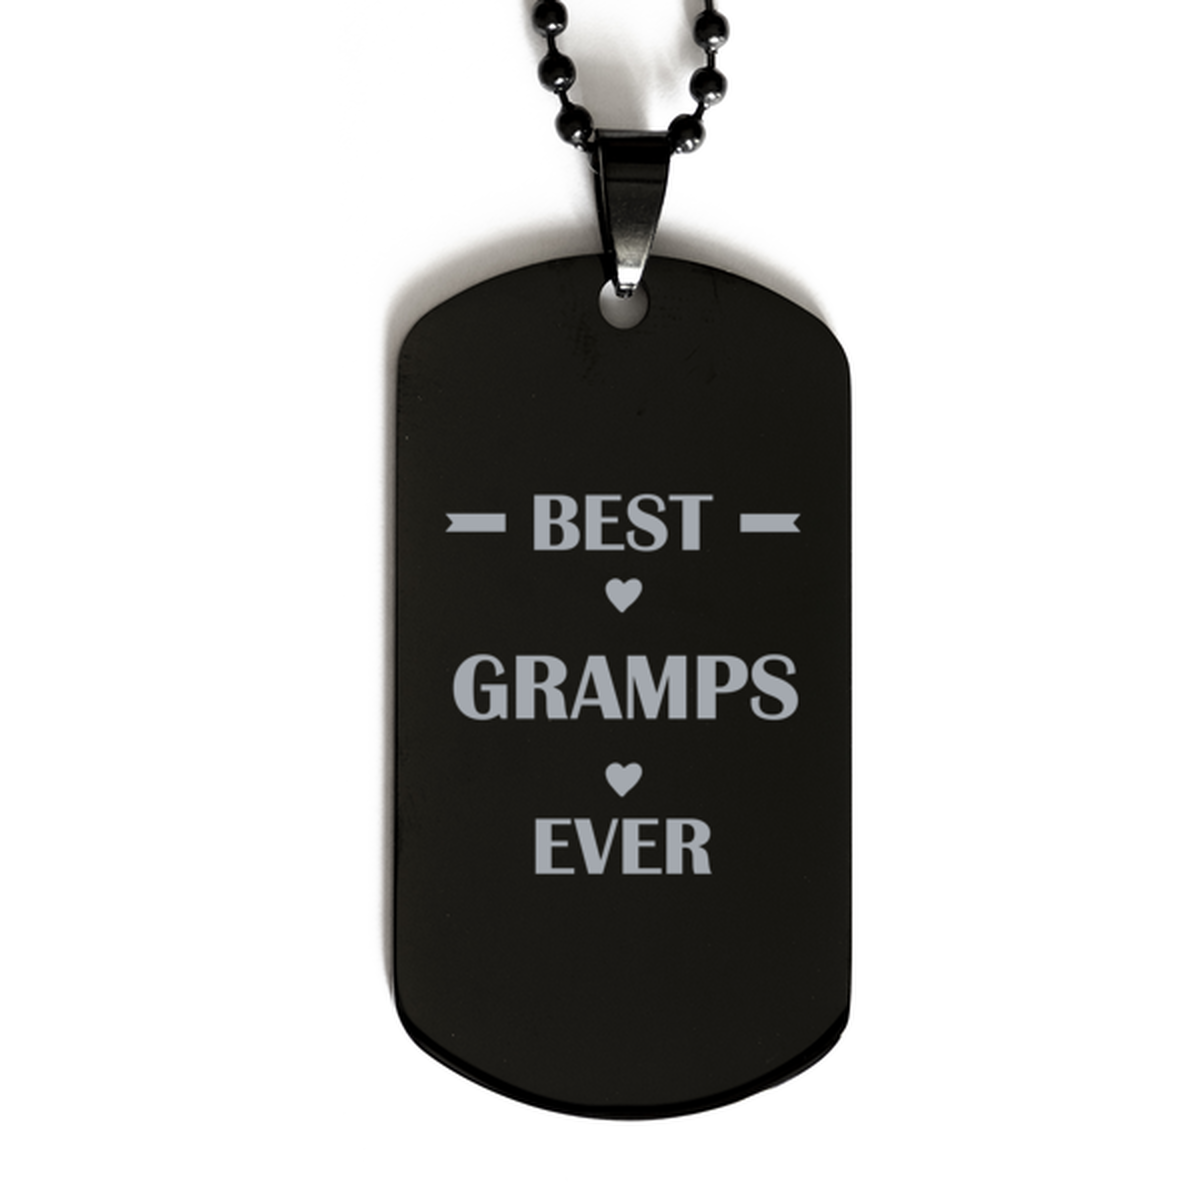 Best Gramps Ever Gramps Gifts, Funny Black Dog Tag For Gramps, Birthday Family Presents Engraved Necklace For Men